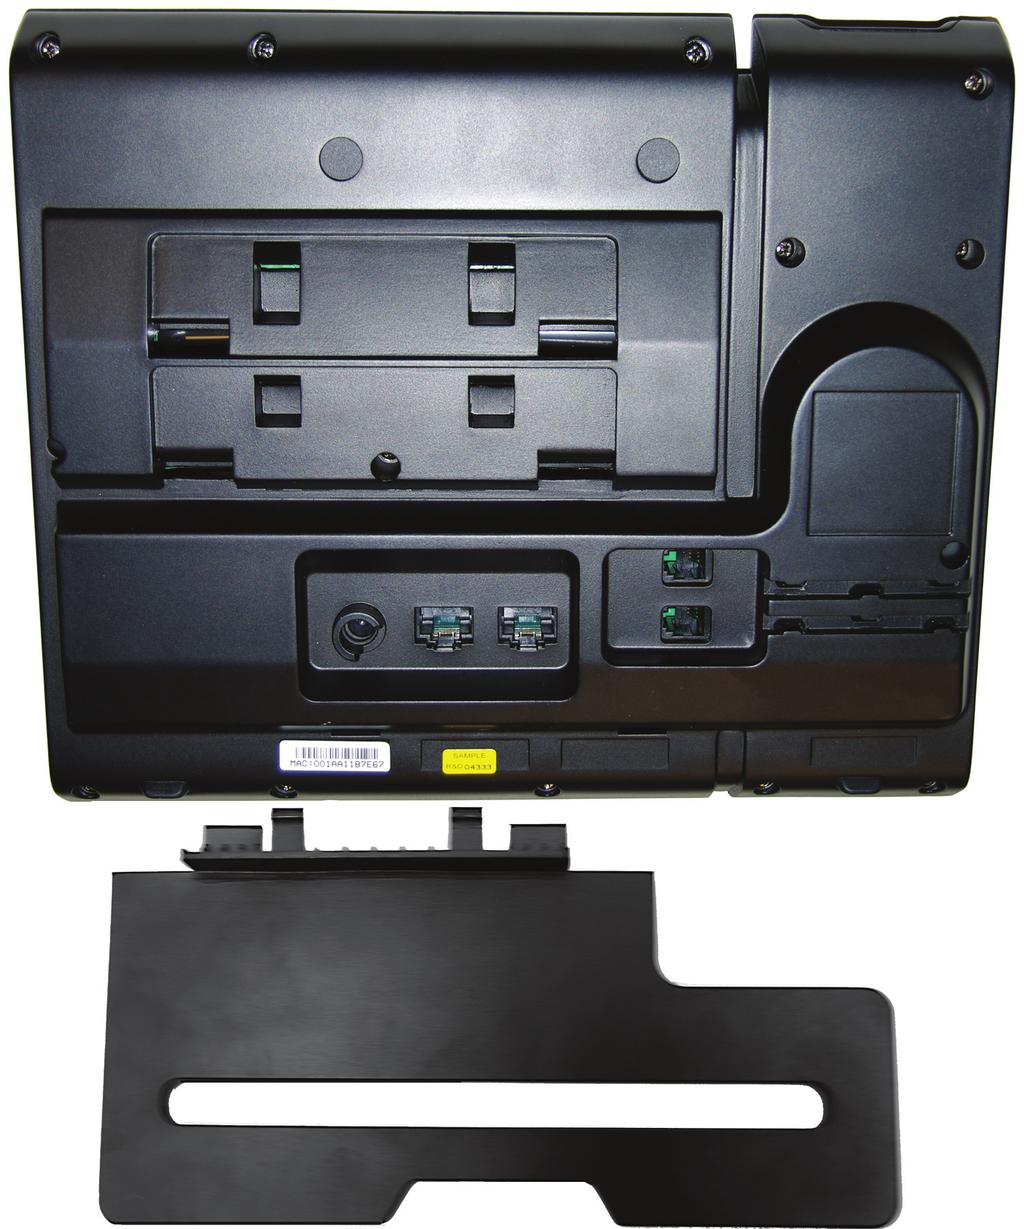 Your Phone 2 1 194406 CISCO 1 Footstand slots for a higher viewing angle 2 Footstand slots for a lower viewing